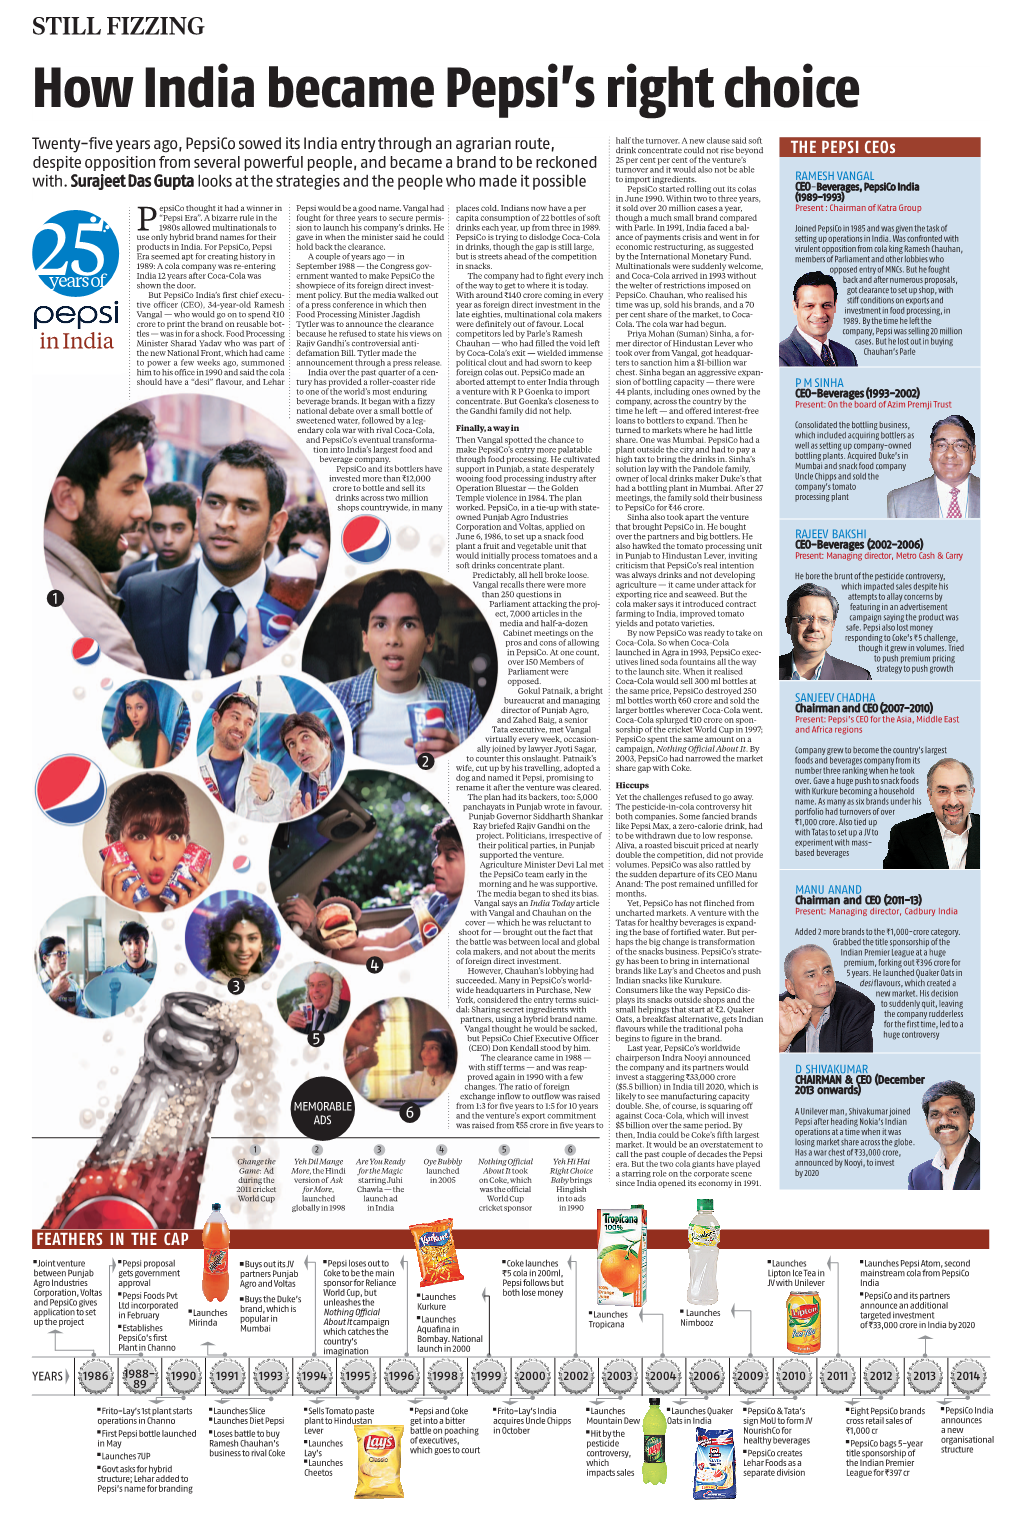 How India Became Pepsi's Right Choice